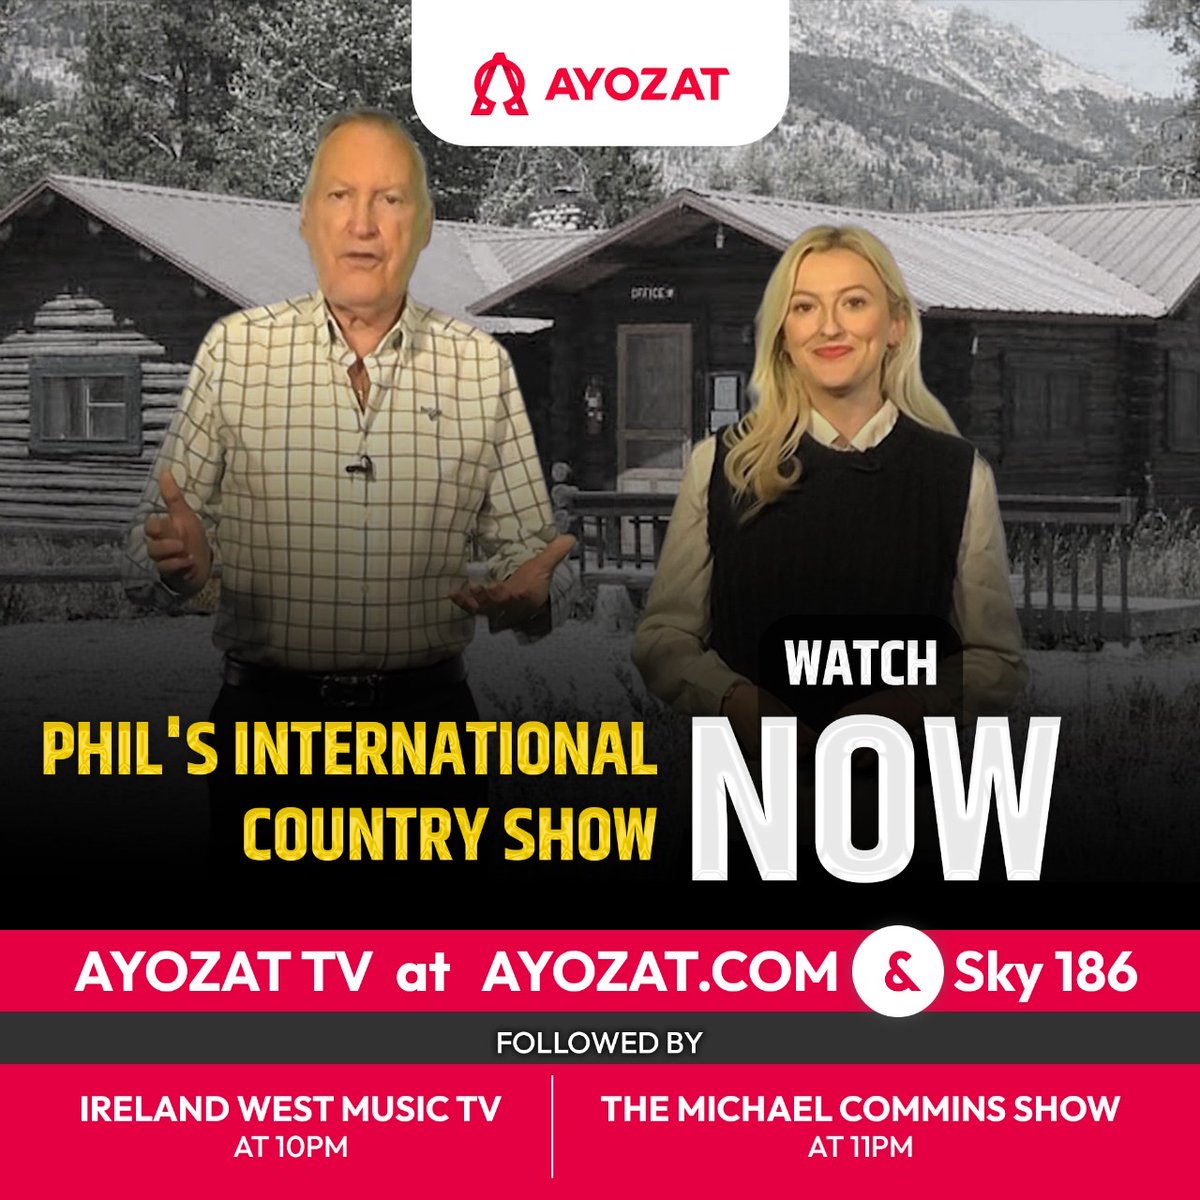 Watch Phil's International Country Show now on AYOZAT TV at ayozat.com and Sky 186, followed by Ireland West Music TV at 10pm and The Michael Commins Show at 11pm #philsinternationalcountryshow #irelandwestmusictv #themichaelcomminsshow @musicmemoriestv @iwmTV